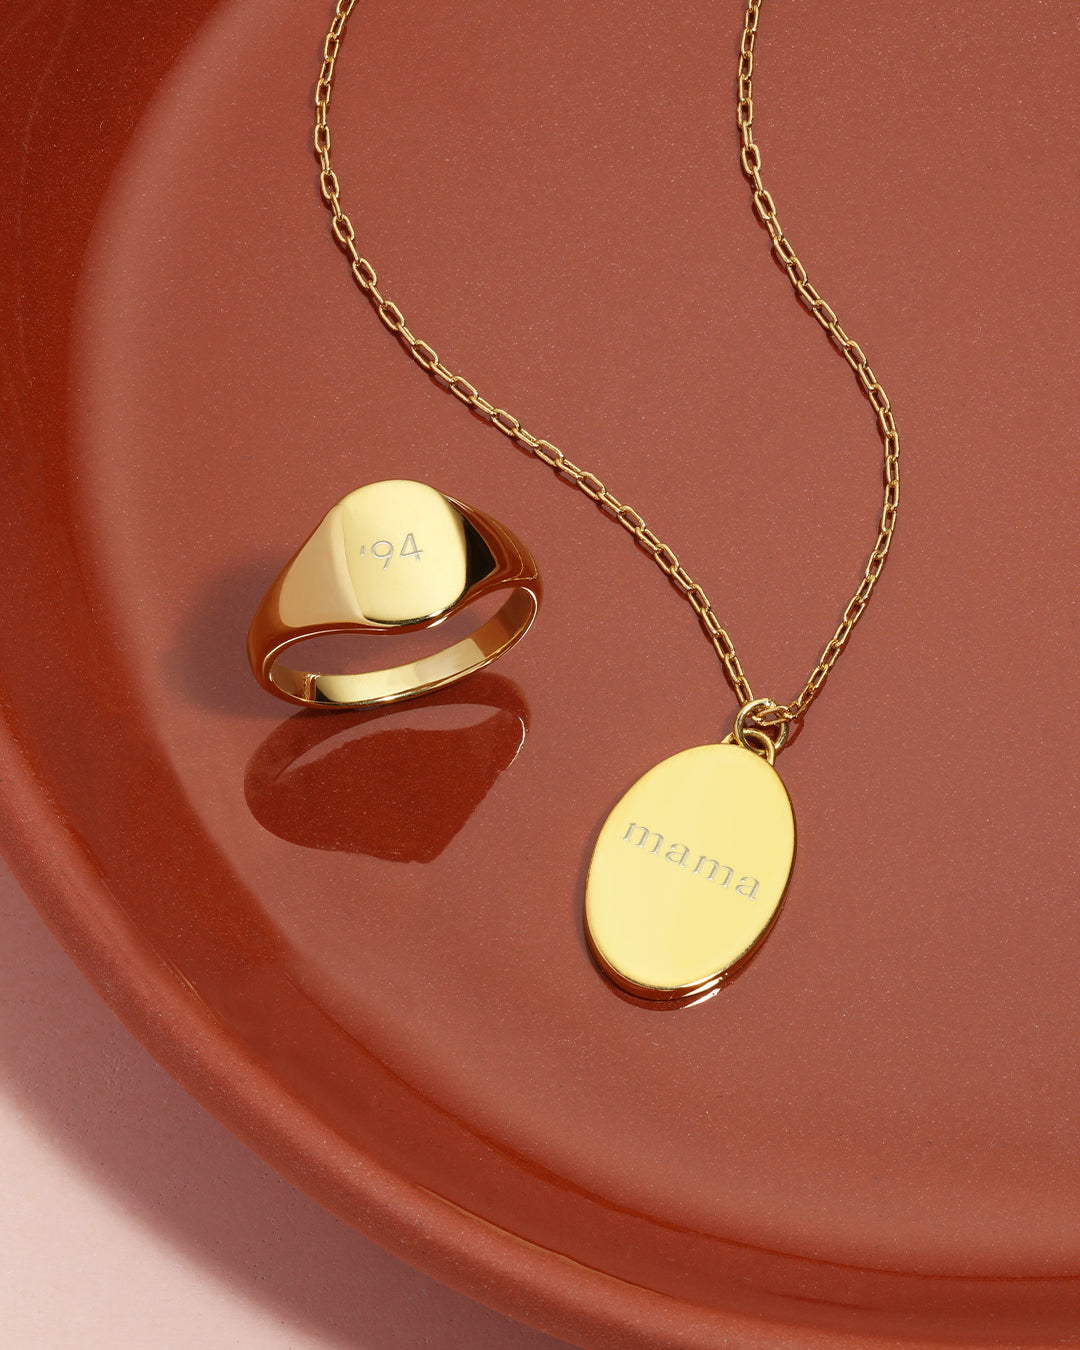 46 BEST Matching His And Hers Necklaces for Boyfriend And Girlfriends!